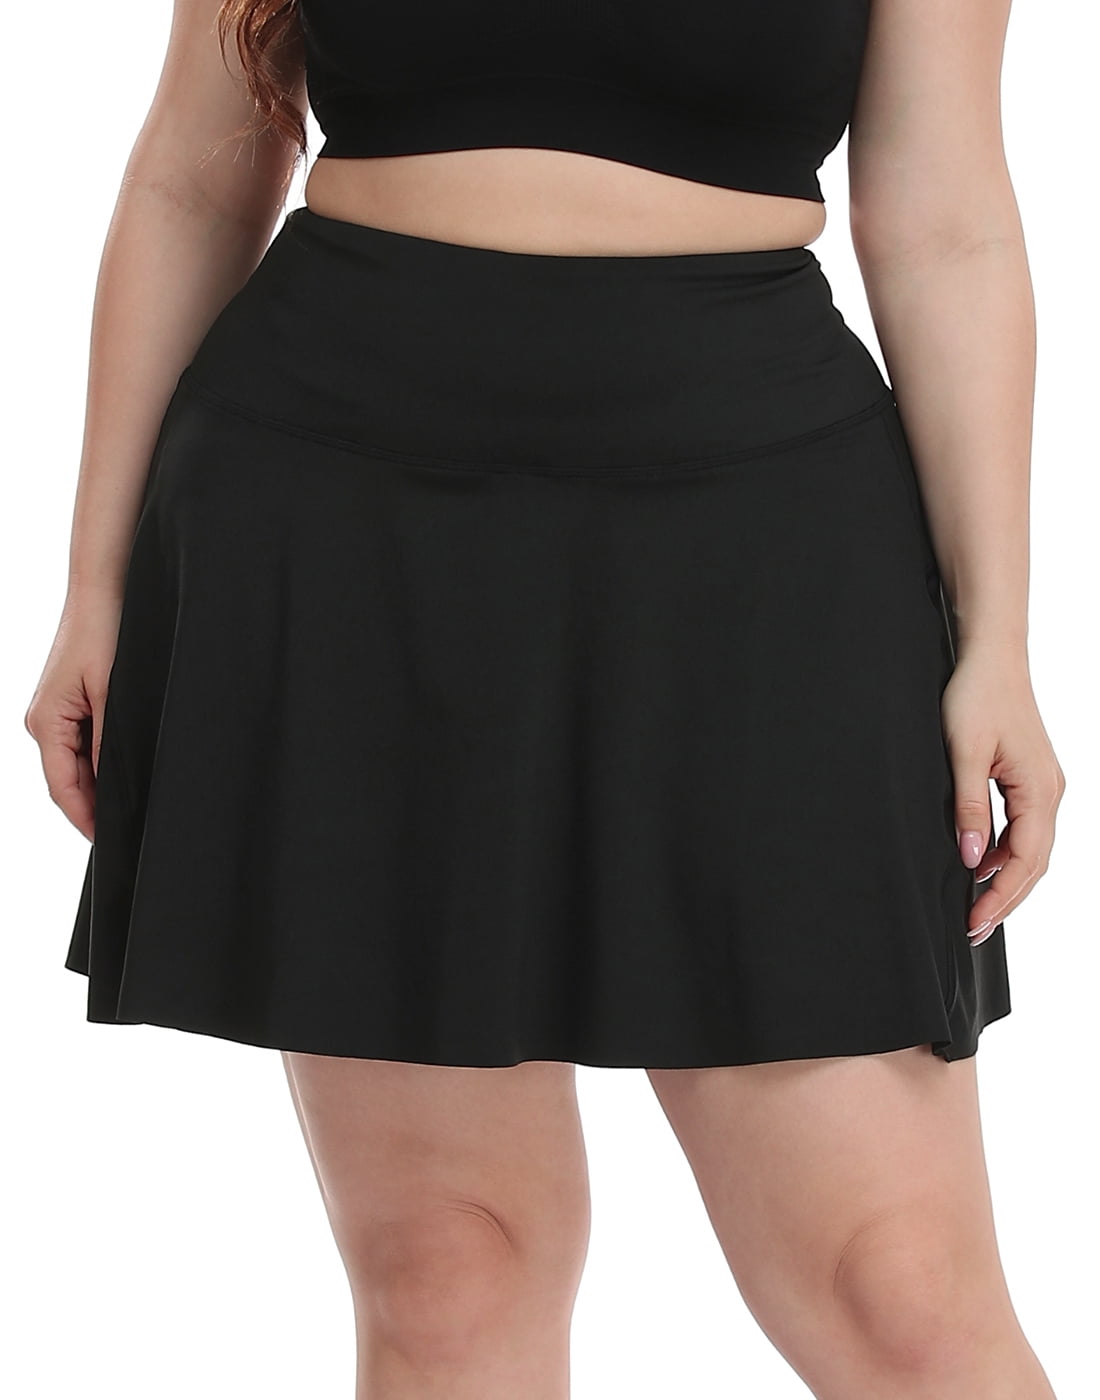 HDE Women's Plus Size Tennis Skort Pleated Skirt with Shorts Black 3X ...